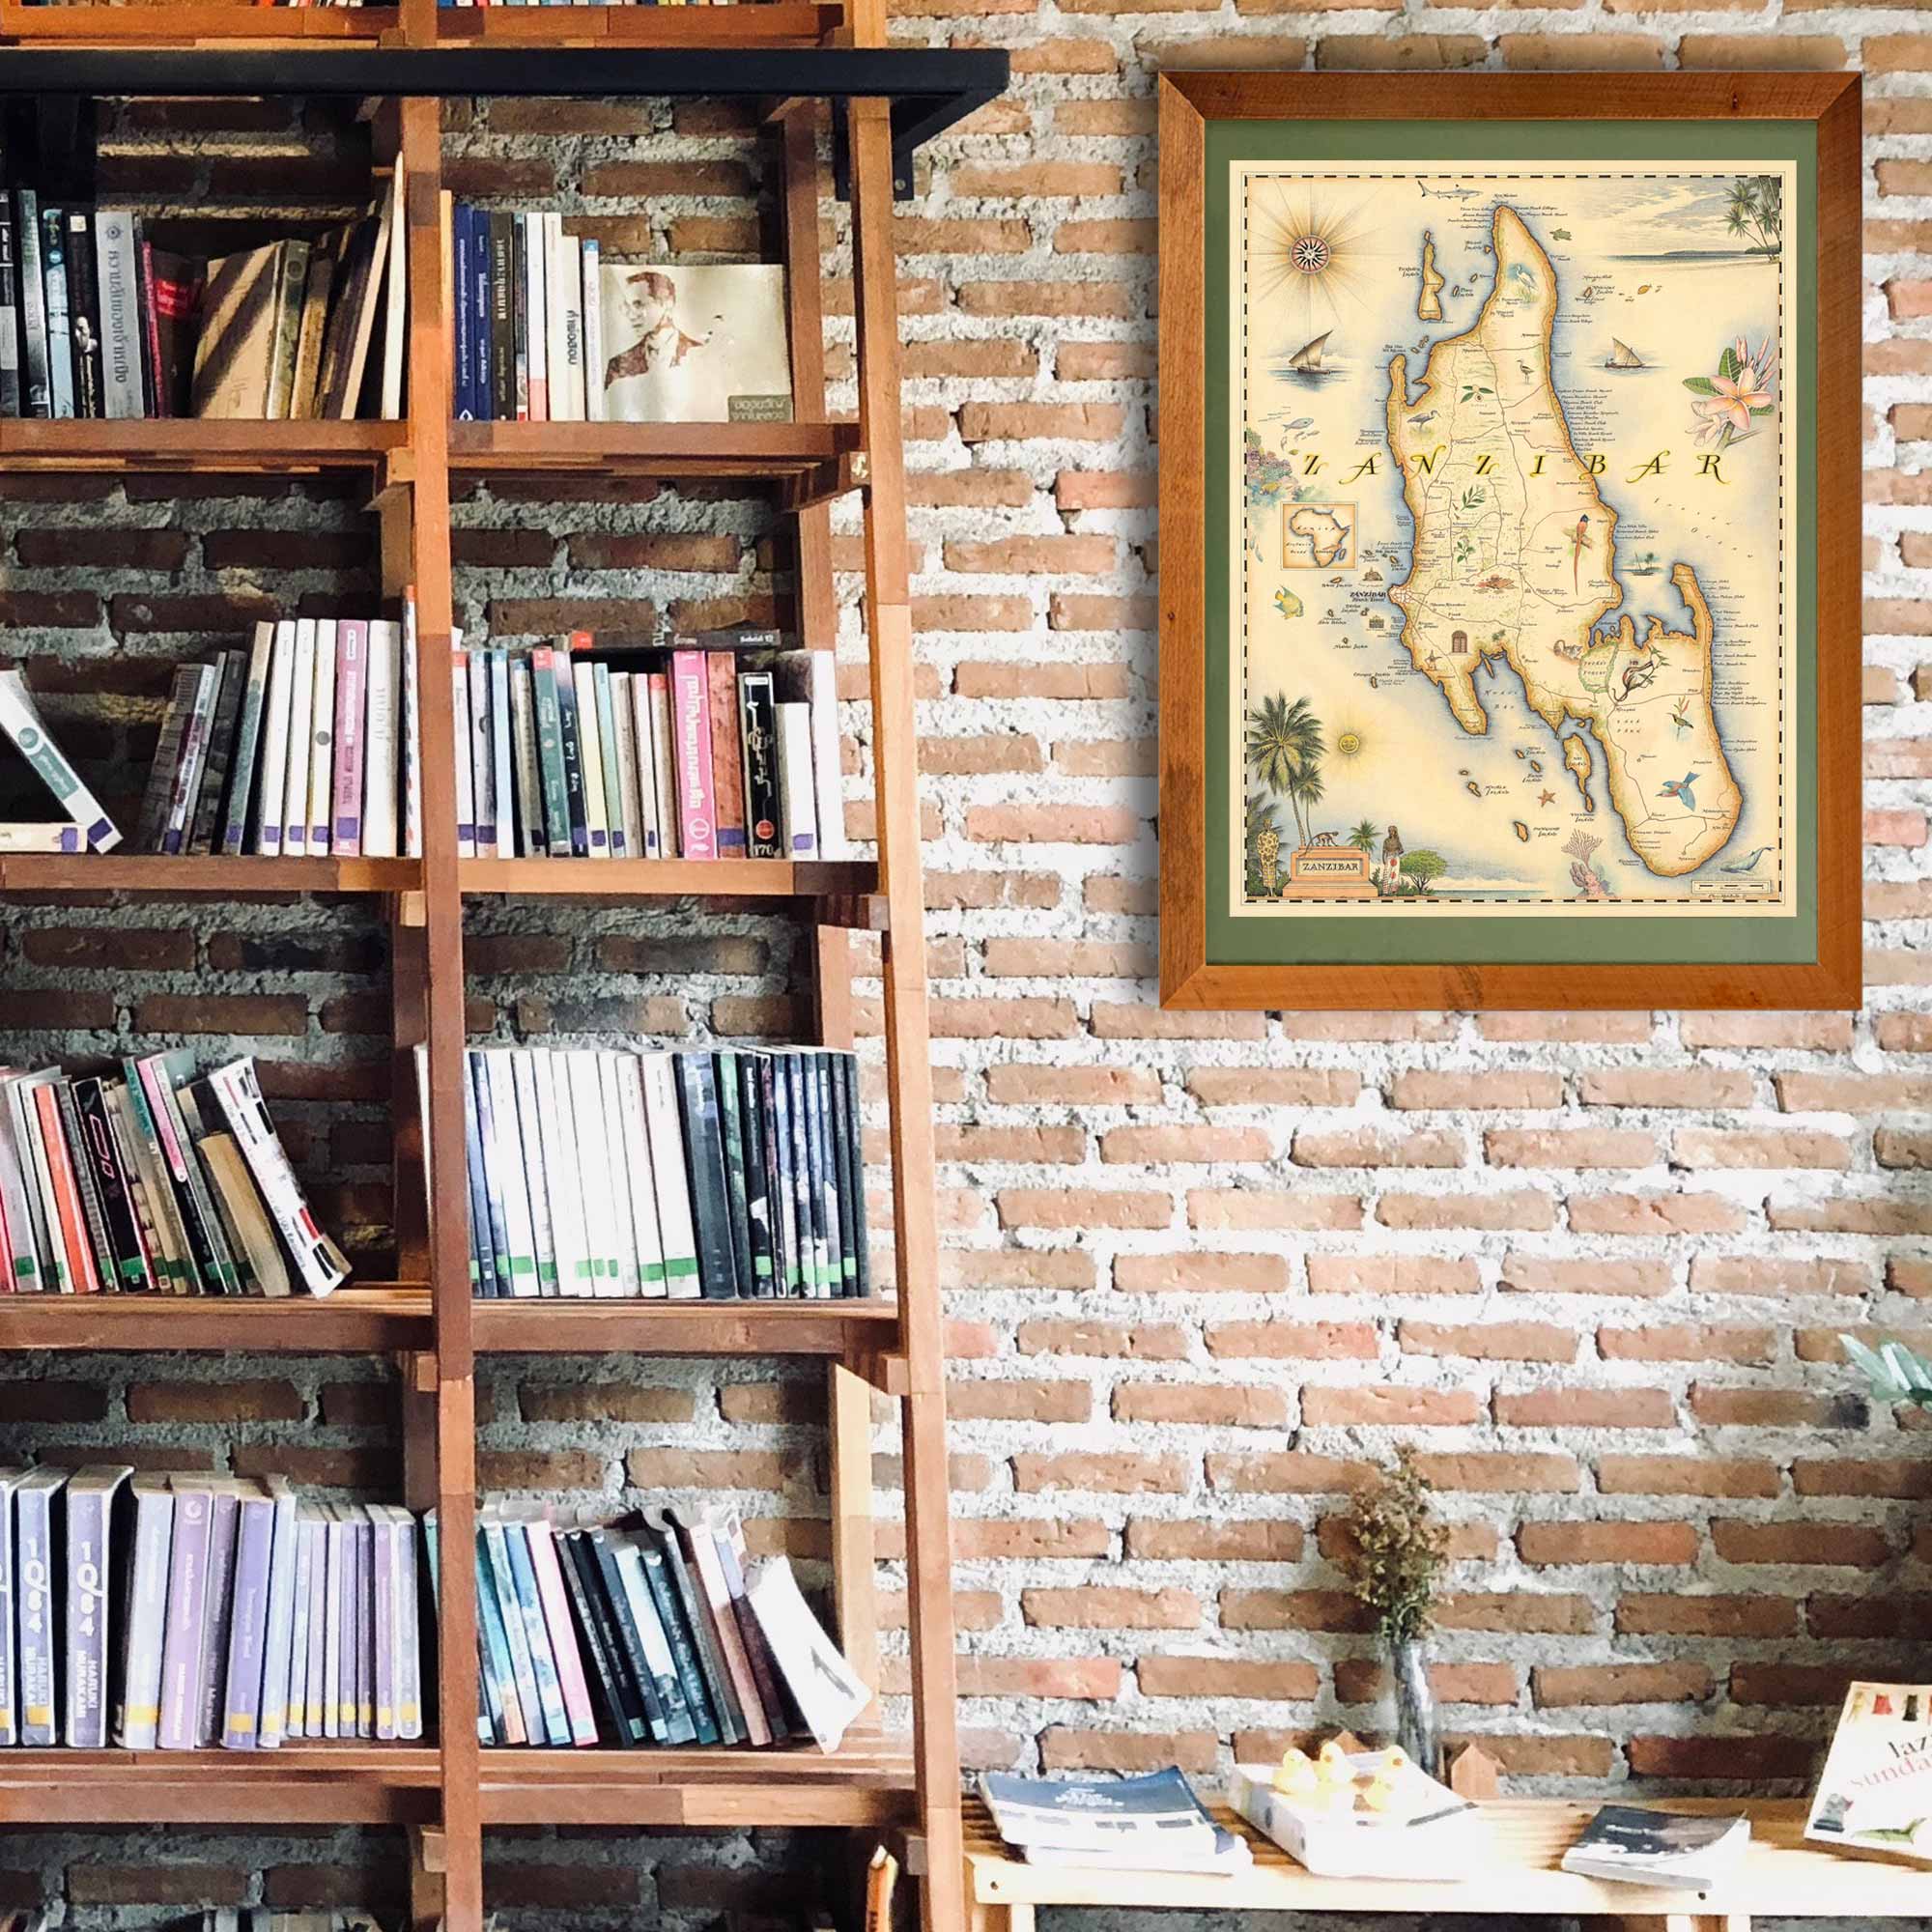 Africa's Zanzibar framed hand-drawn map is hanging on a brick wall next to a large shelf unit with a ladder. 